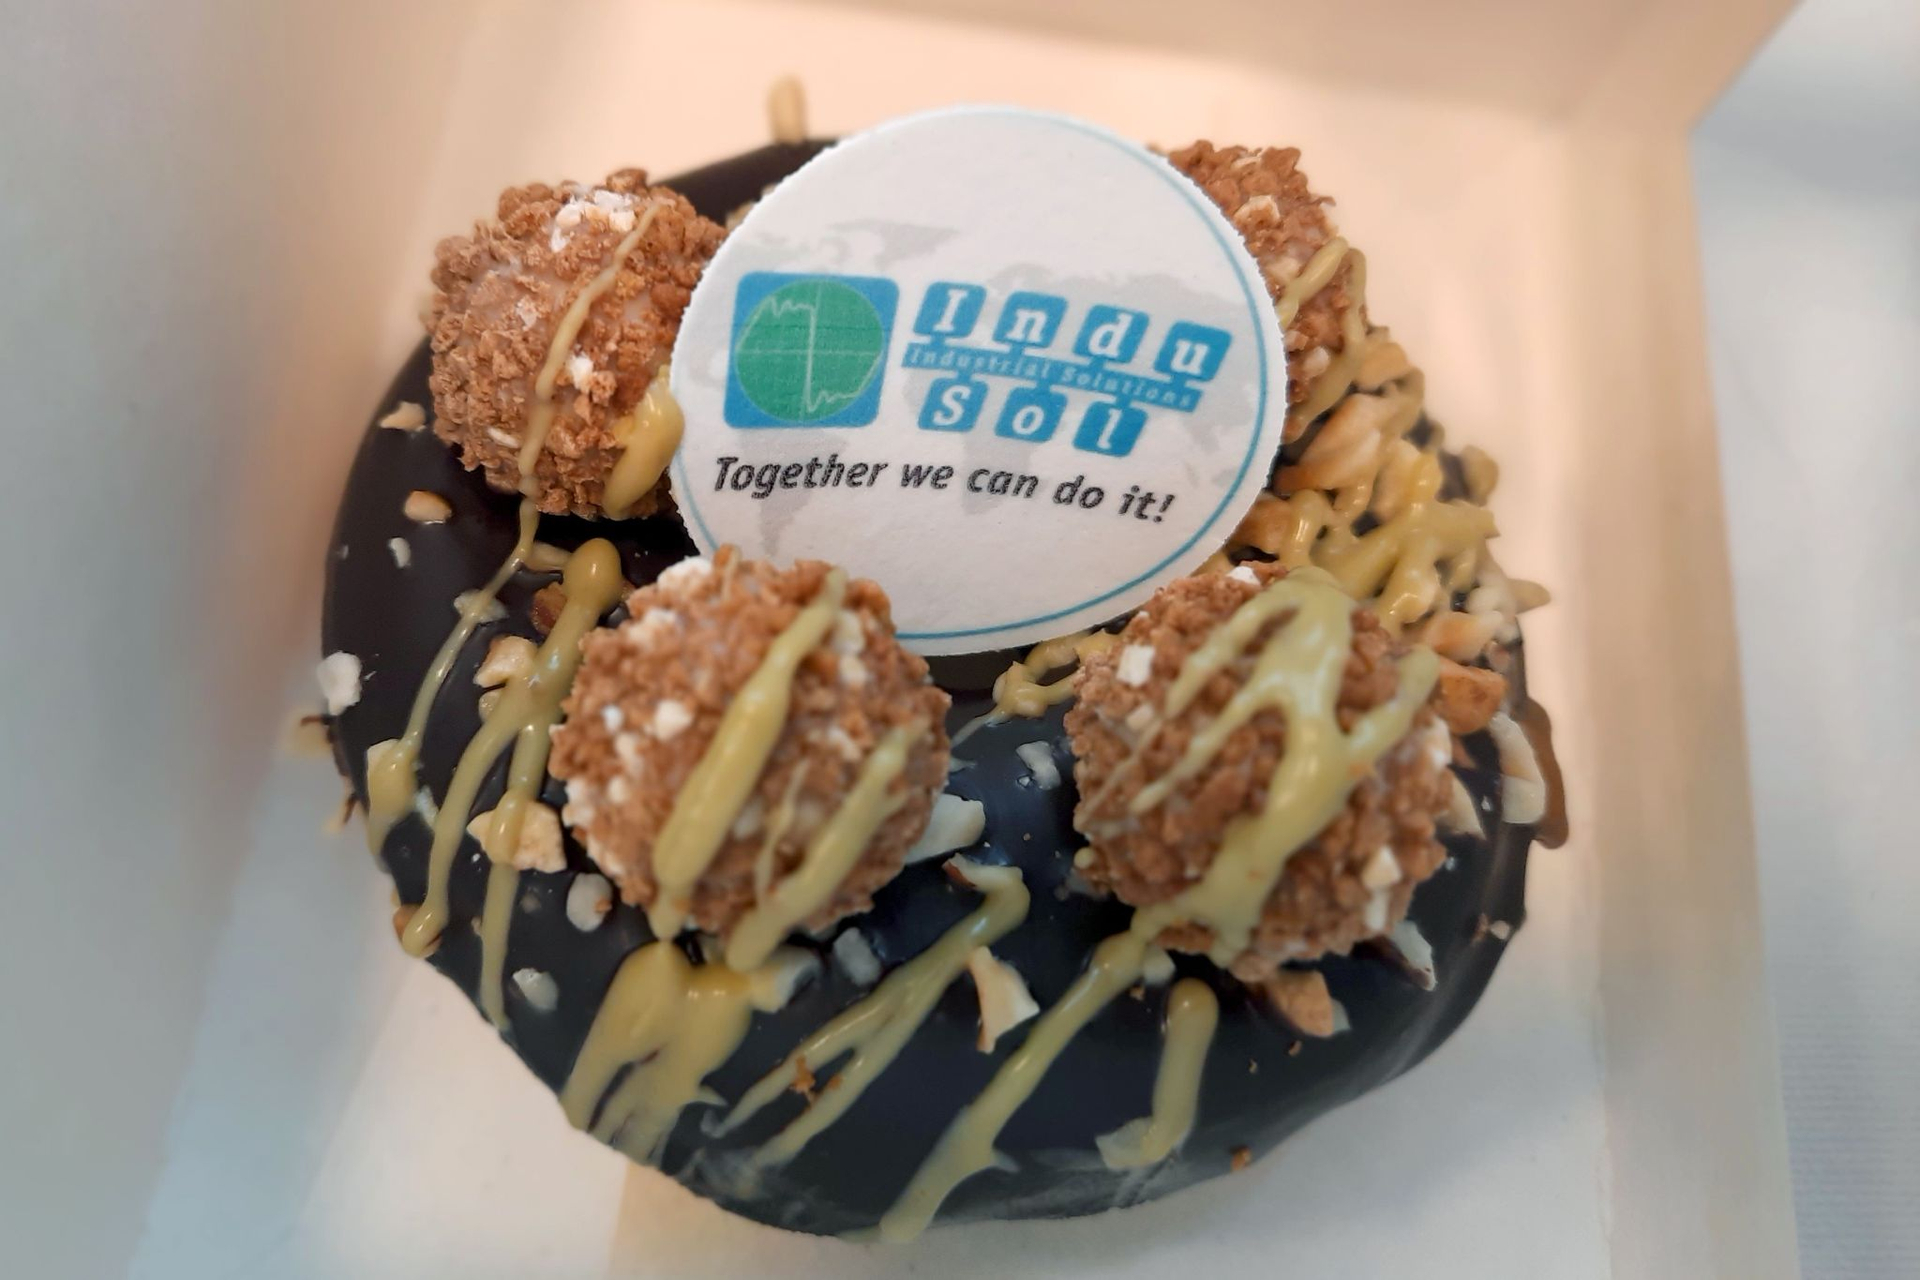 Delicious donut with a message: We can do it together